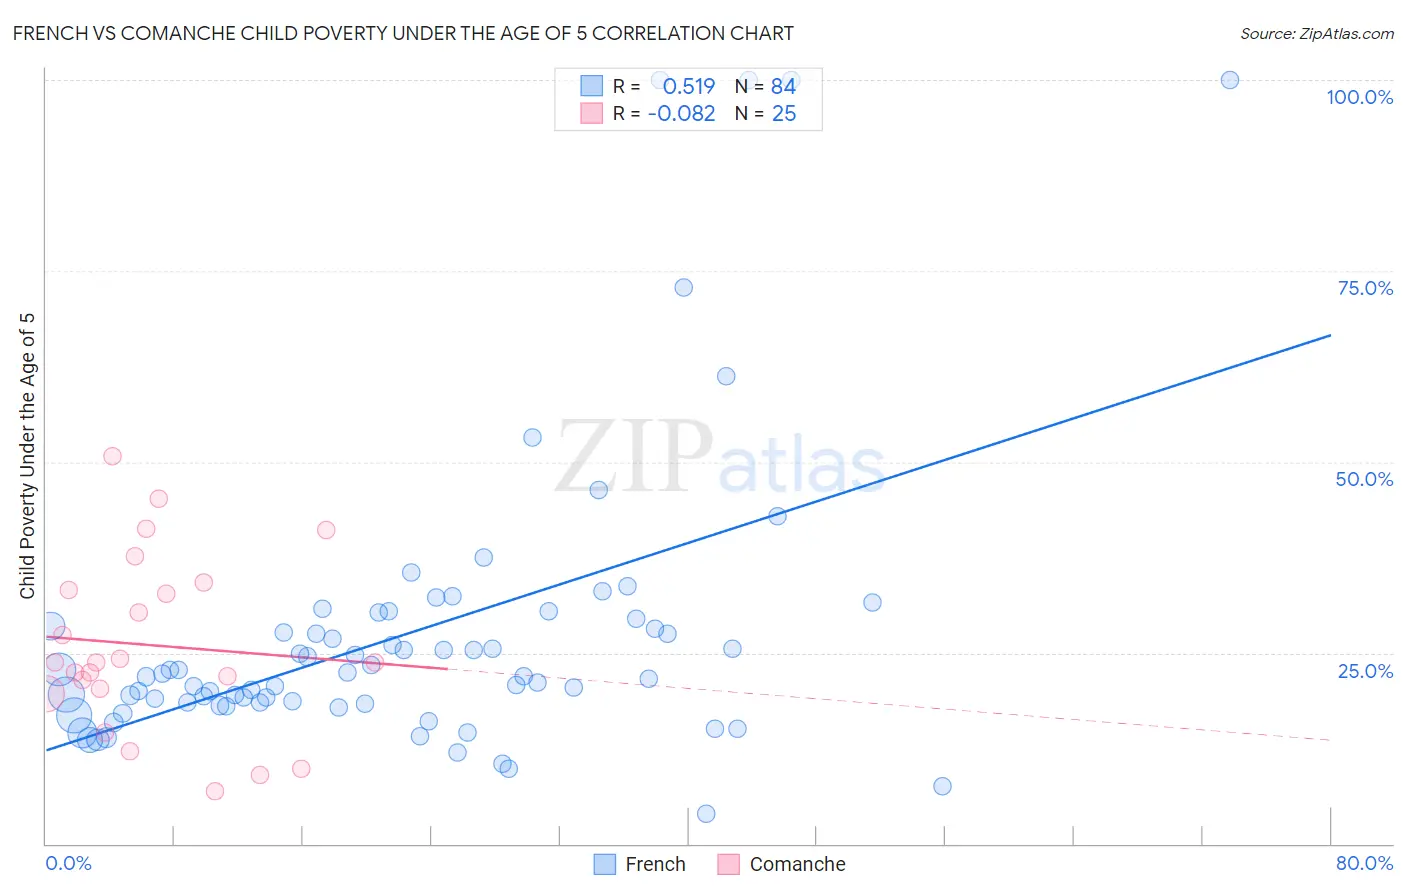 French vs Comanche Child Poverty Under the Age of 5